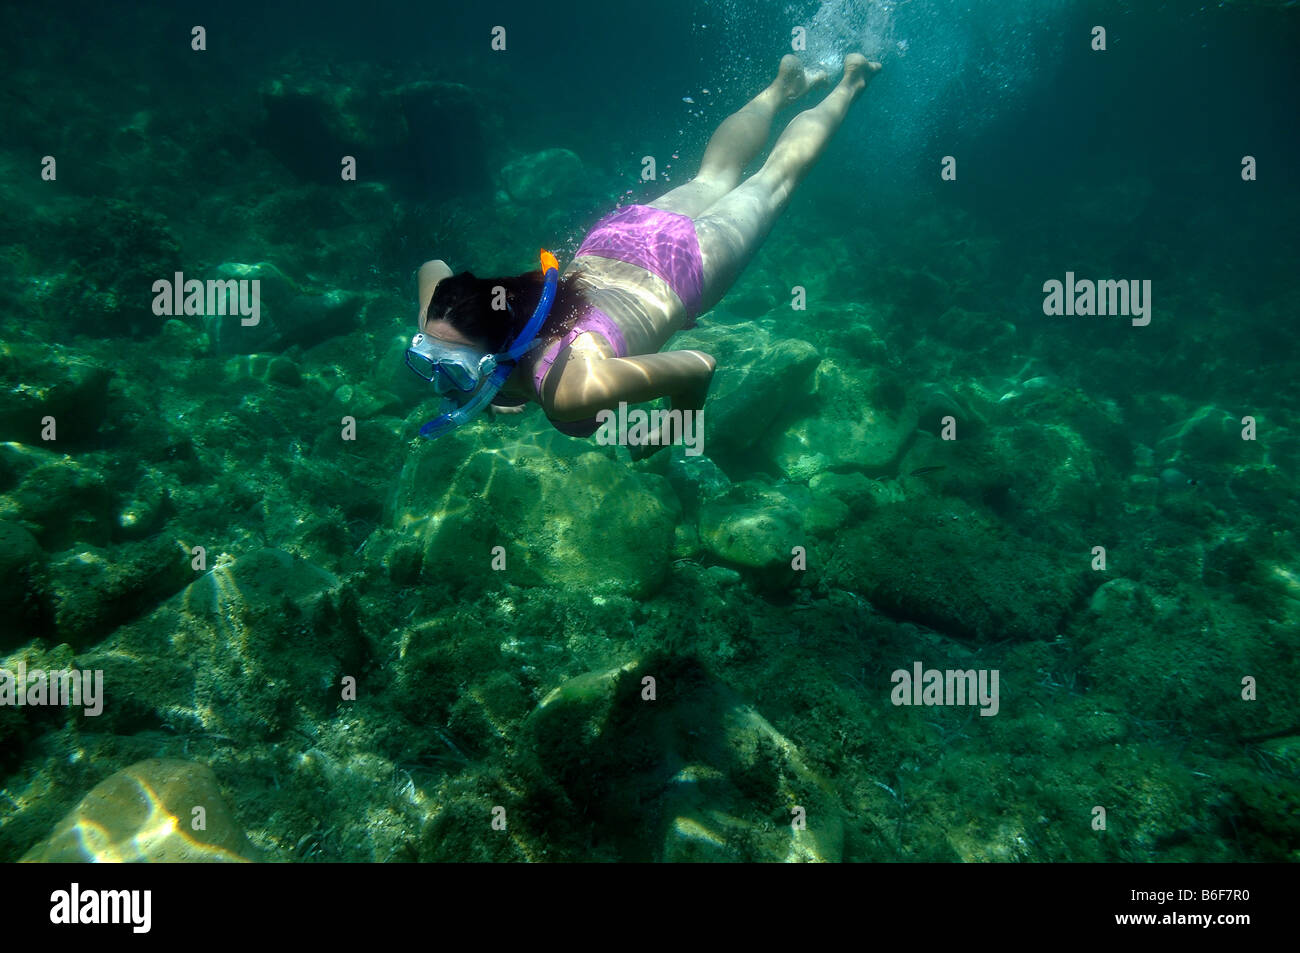 Woman with a snorkel and diving goggles scuba diving in the sea, underwater picture, Villasimius, Sardinia, Italy, Europe Stock Photo